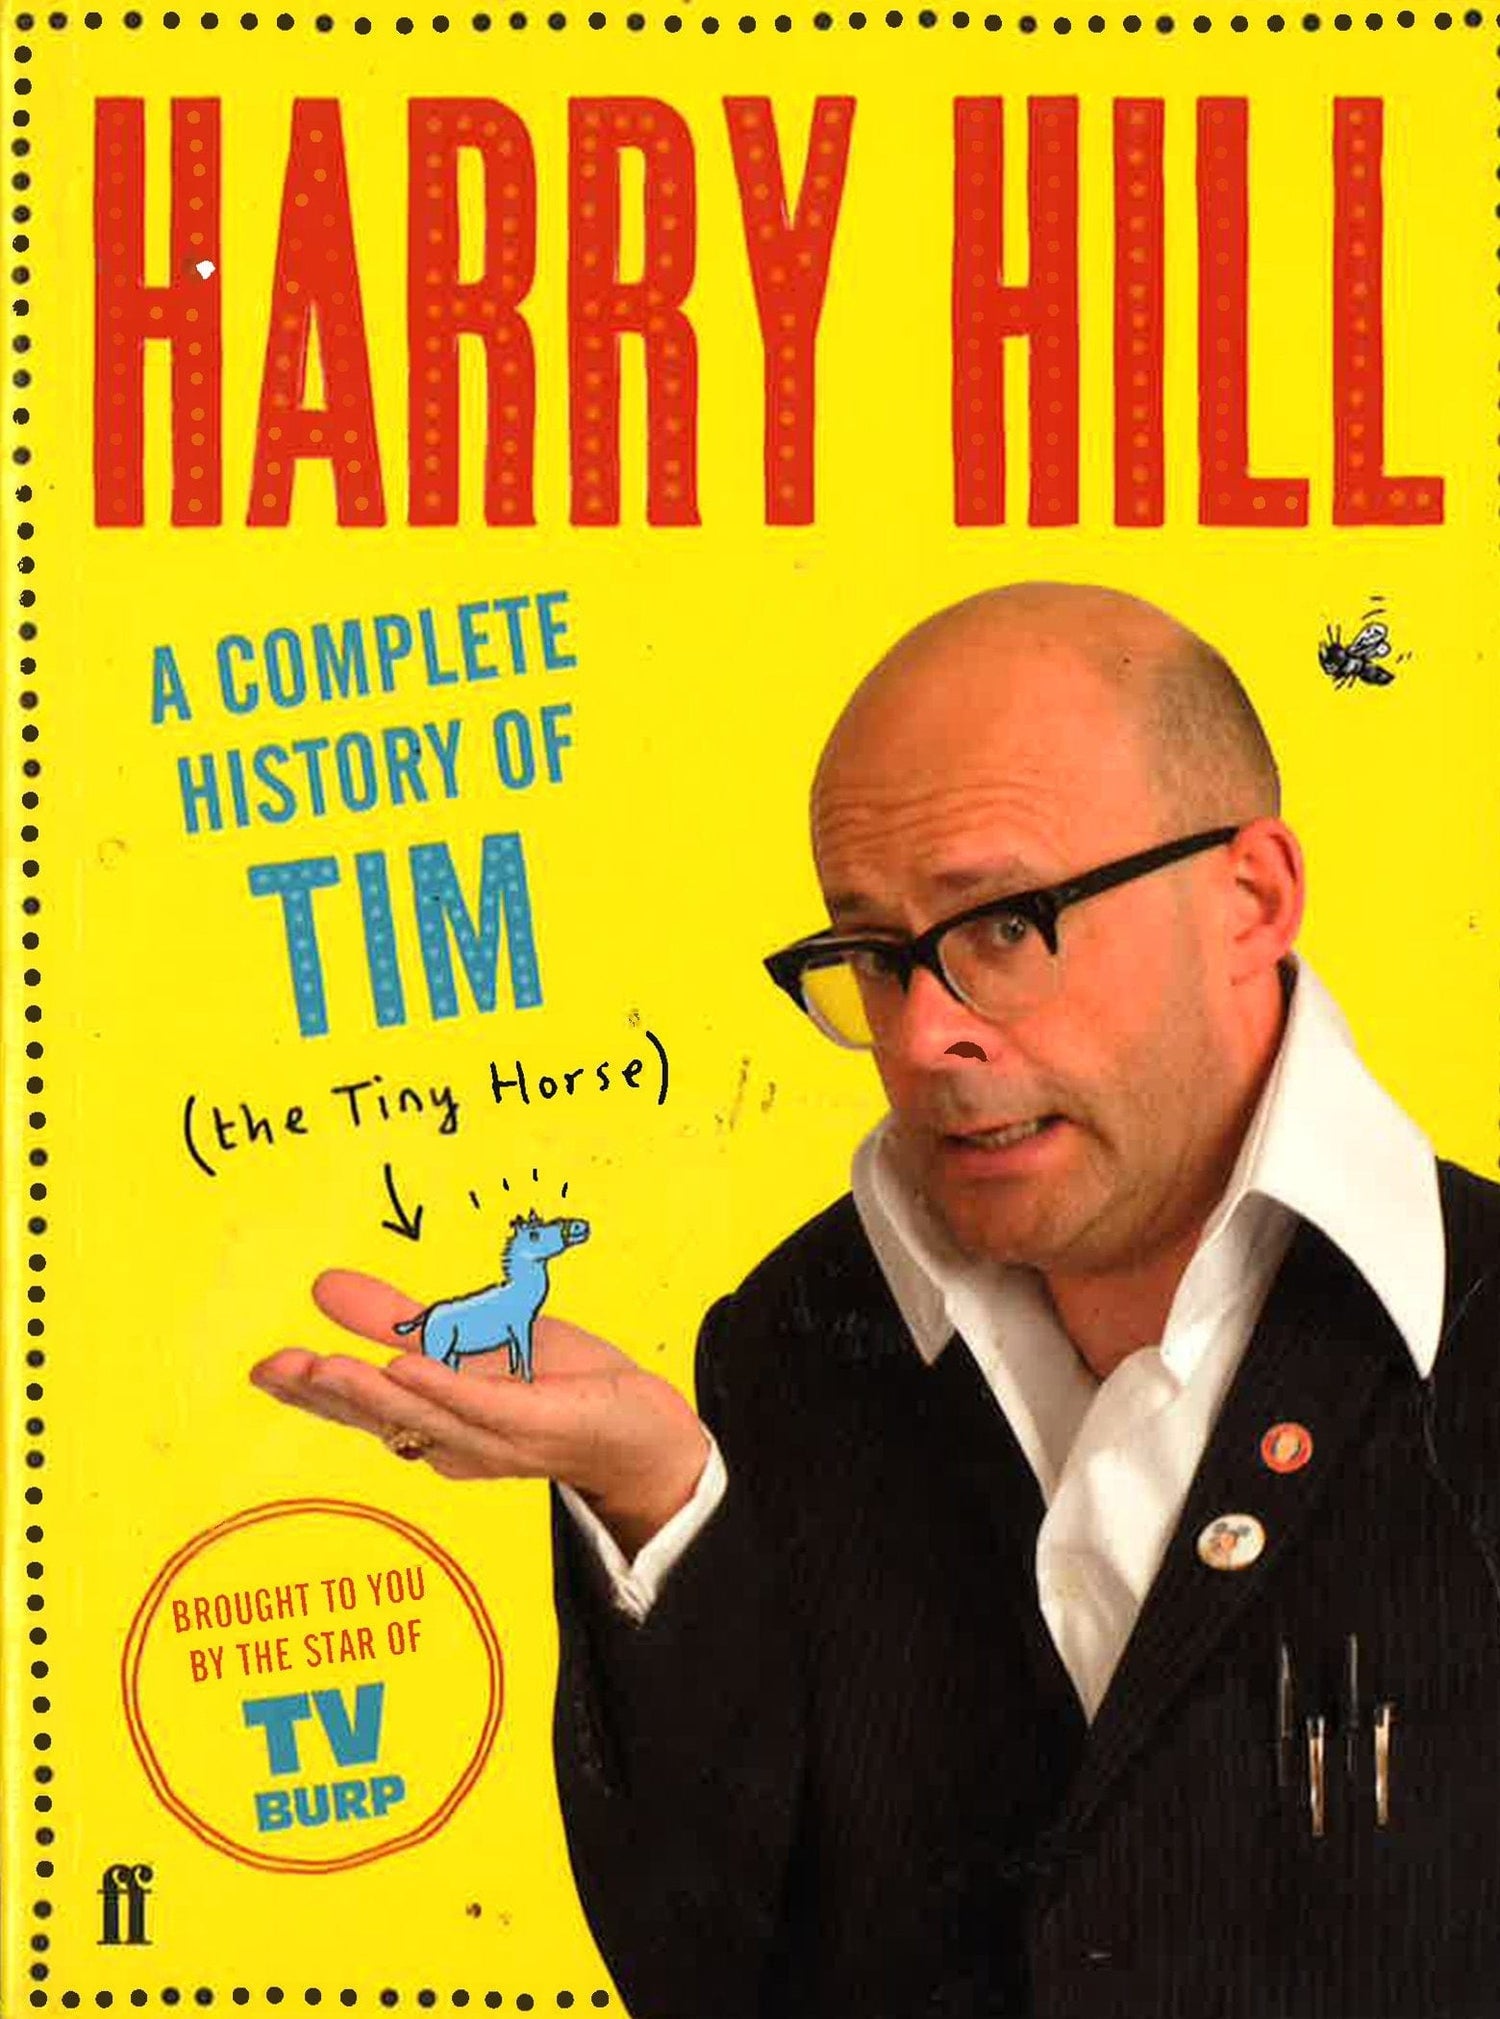 A Complete History of Tim (the Tiny Horse)